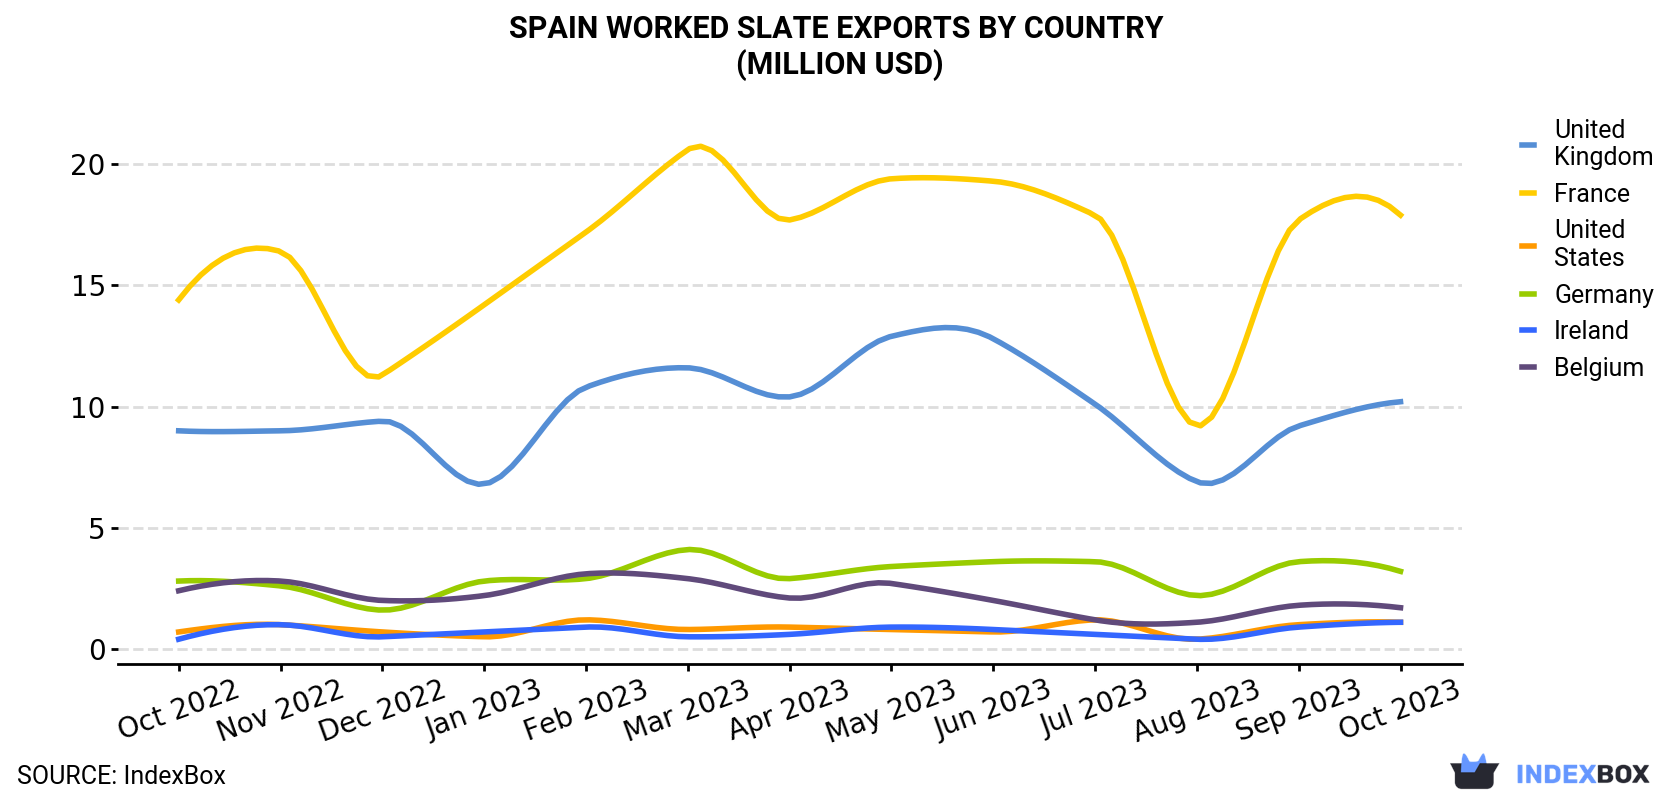 Spain Worked Slate Exports By Country (Million USD)